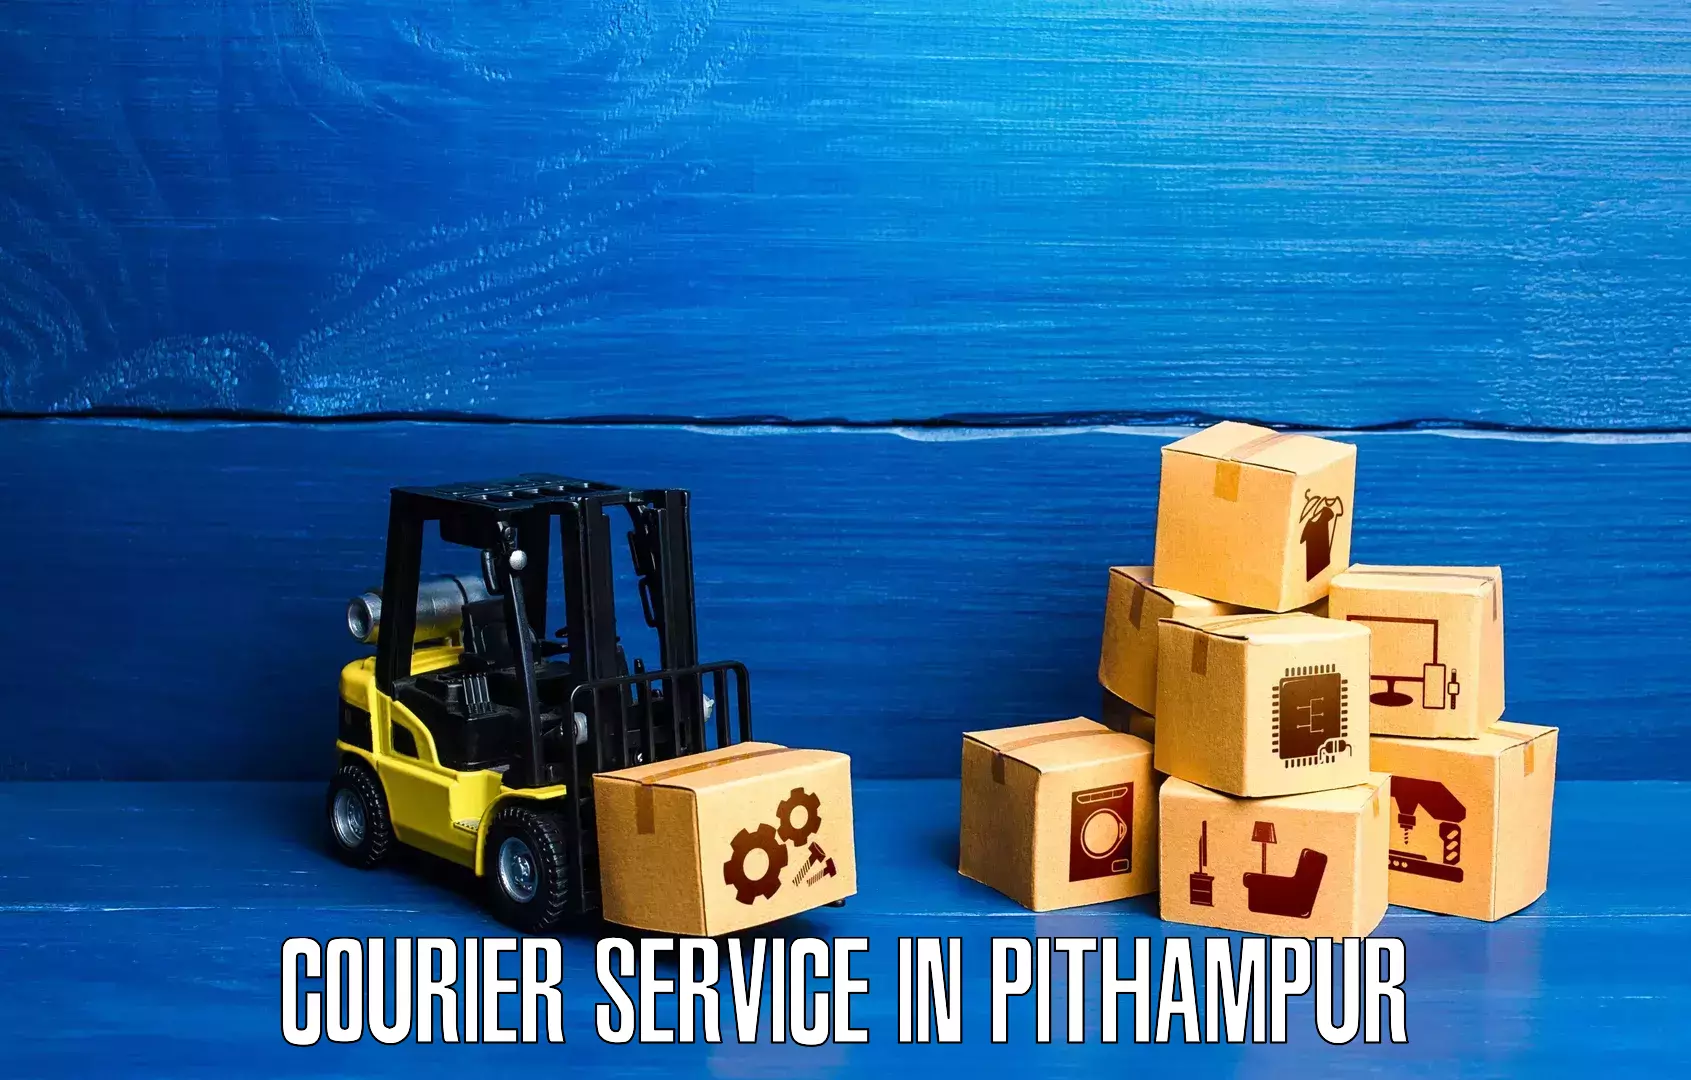 High-speed delivery in Pithampur